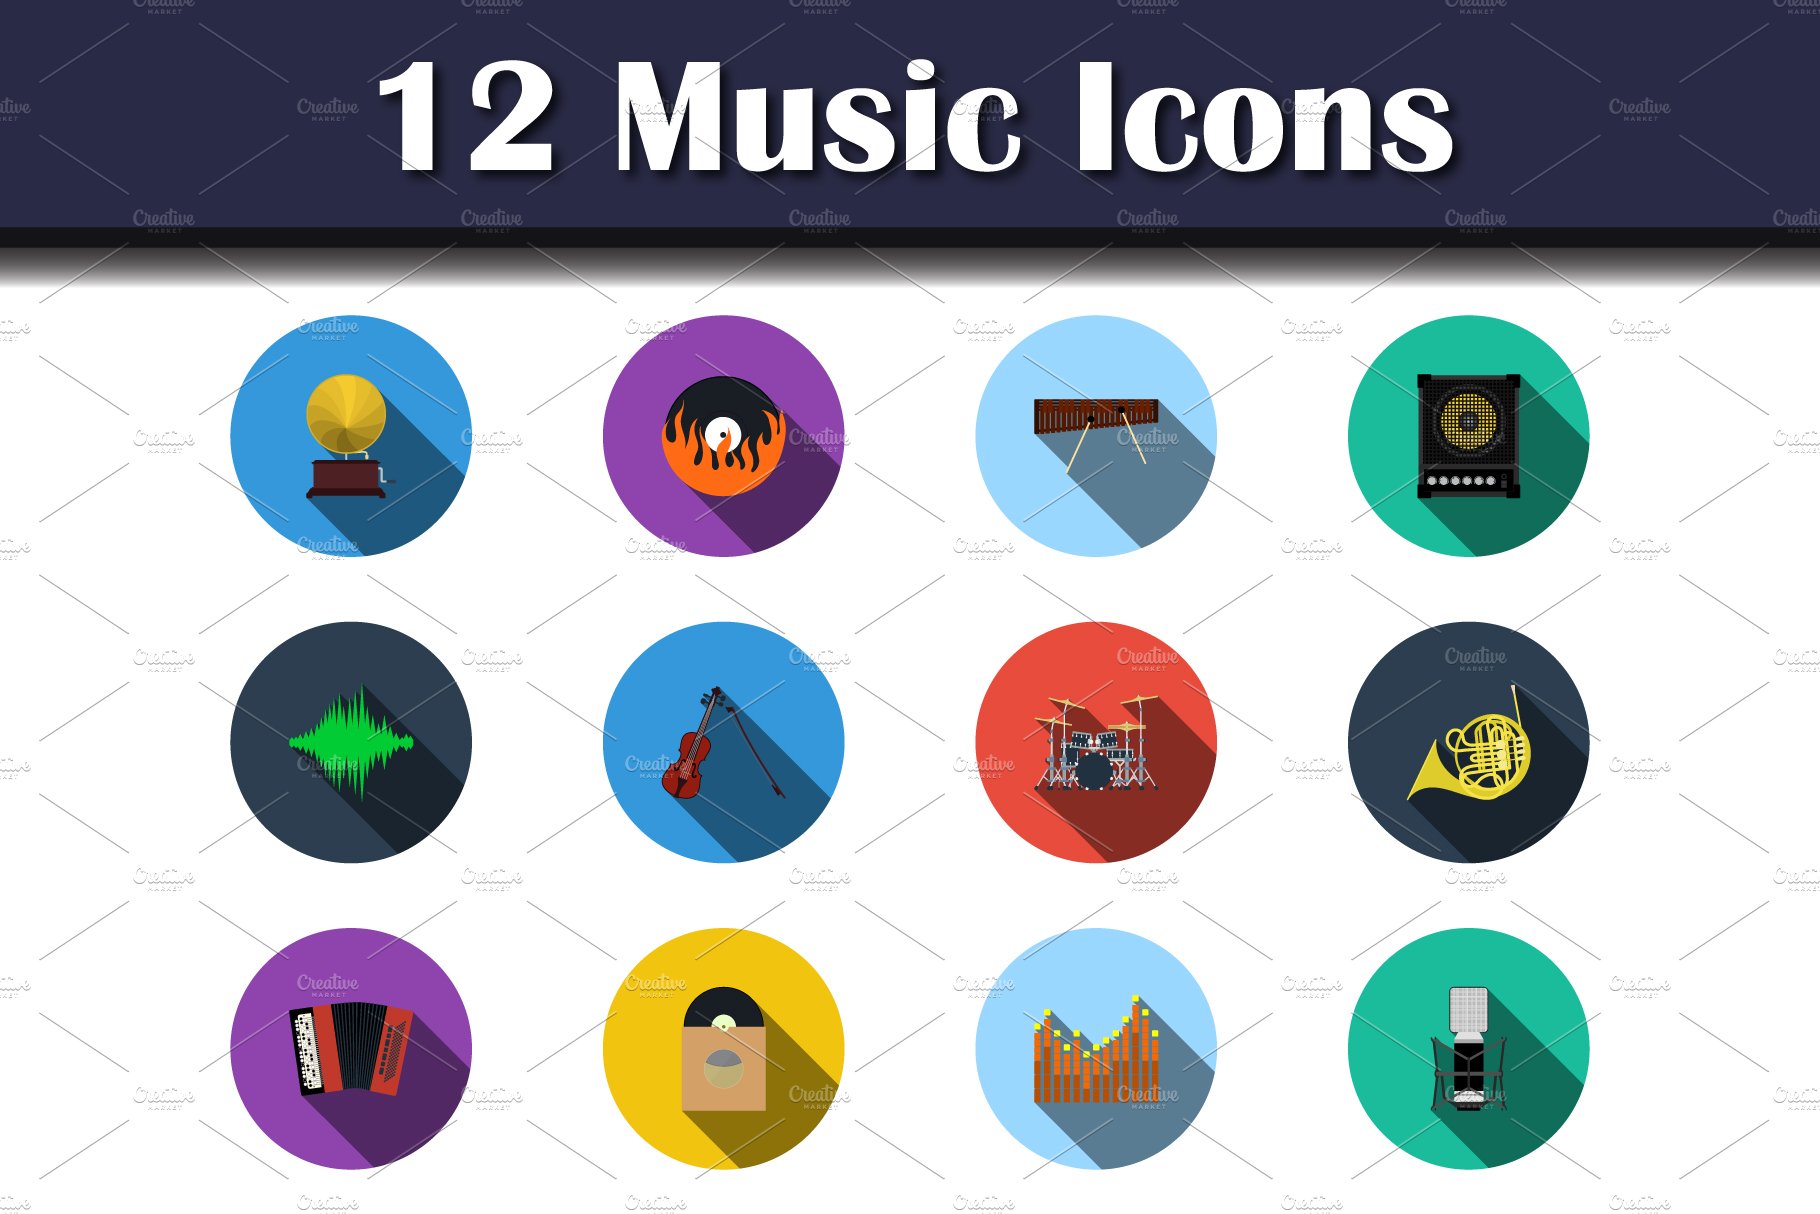 Music Icon Set cover image.